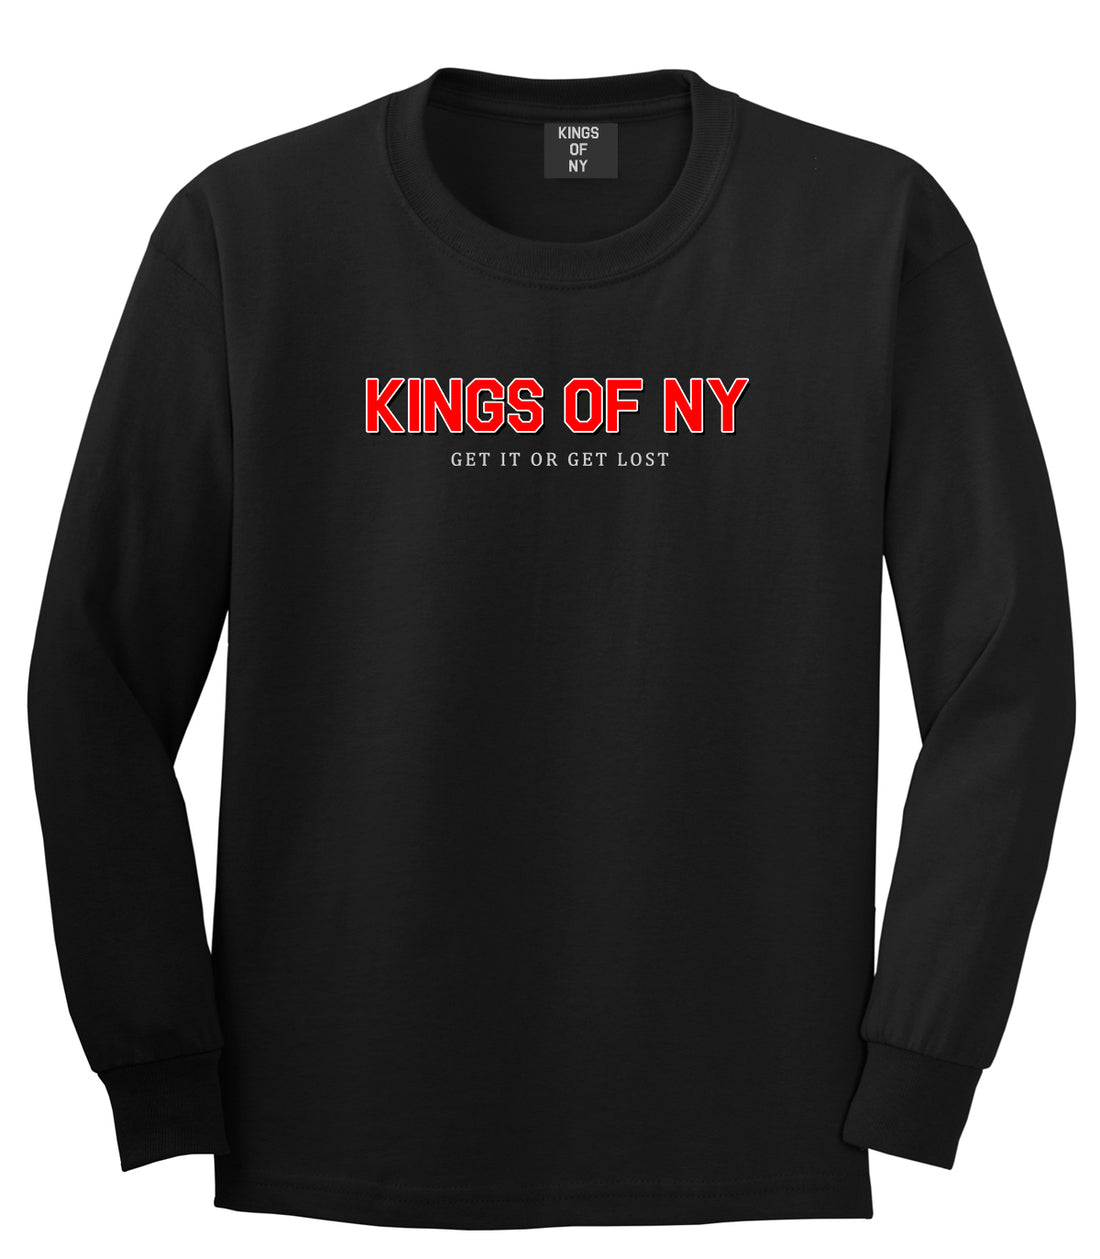 Get It Or Get Lost Mens Long Sleeve T-Shirt Black by Kings Of NY